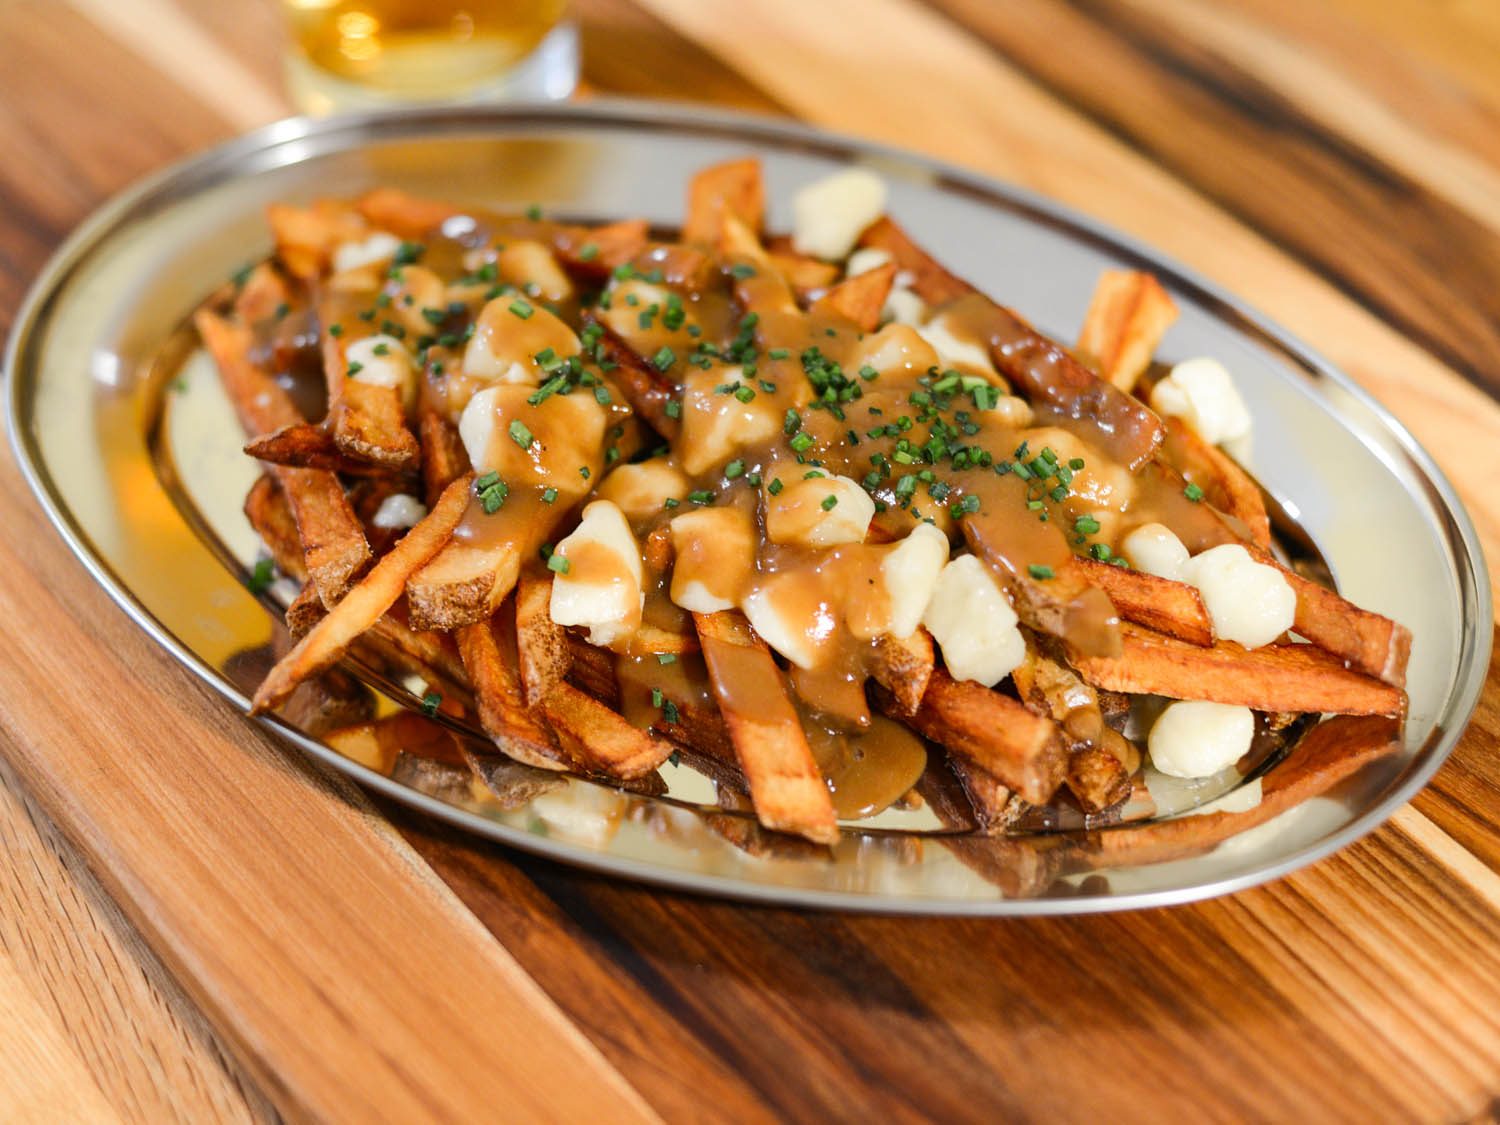 🥔 Can We Guess Your Generation Based on the Different Ways You’ve Eaten Potatoes? Poutine